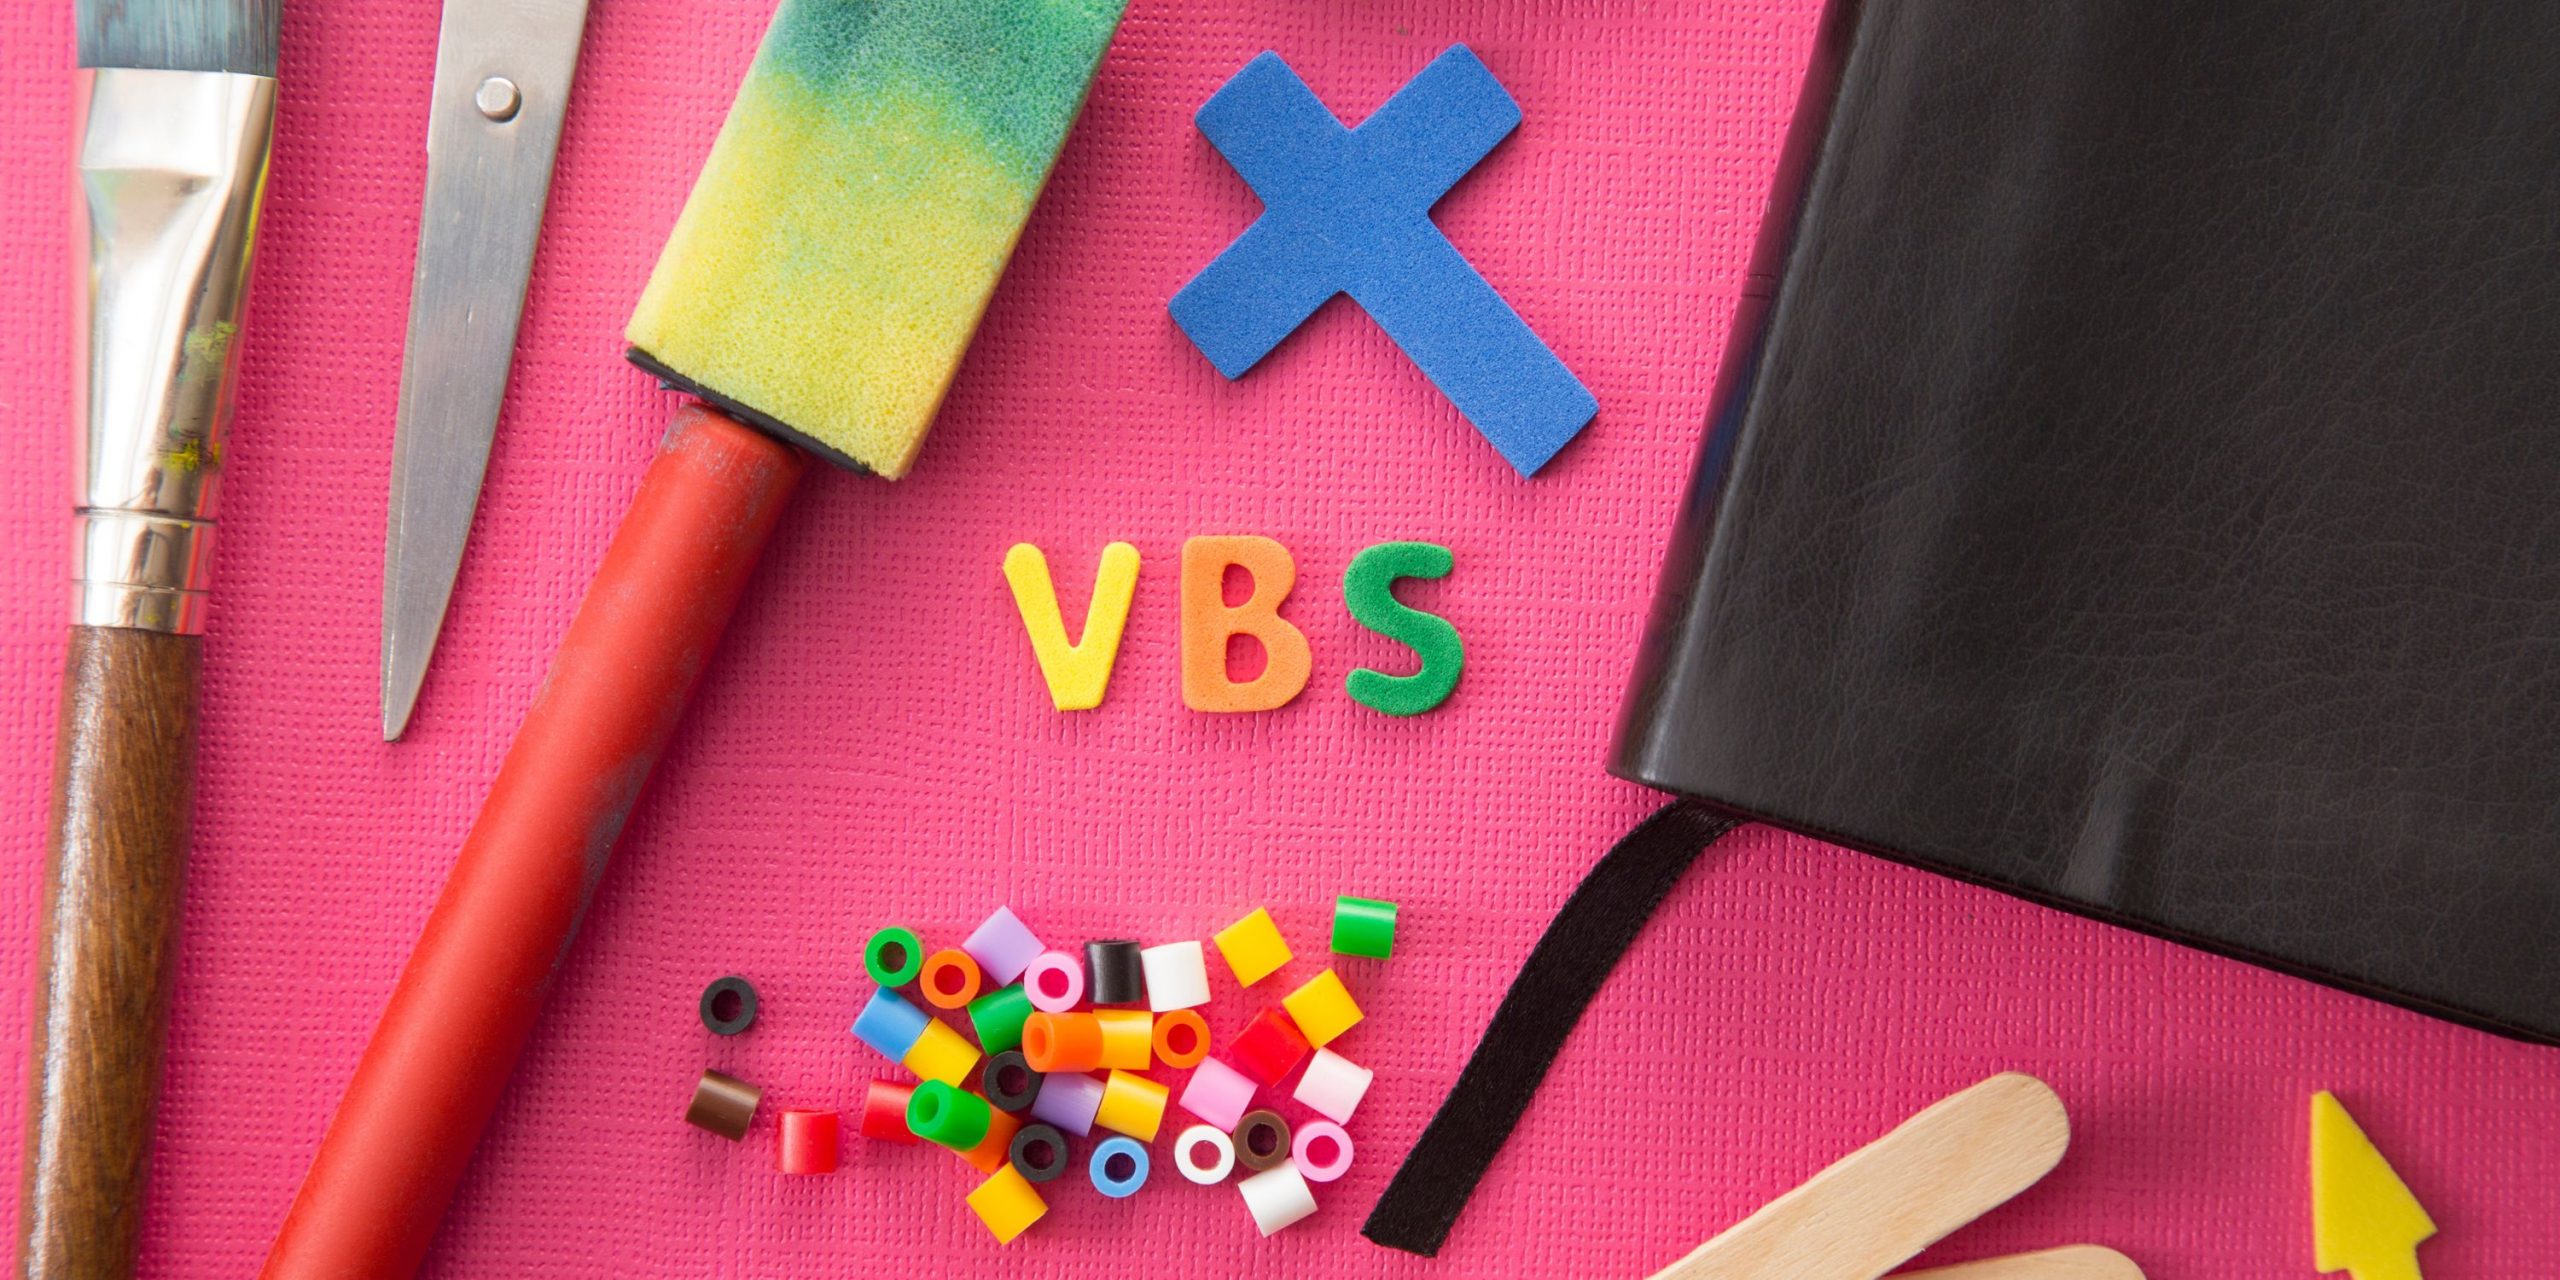 VBS written in craft material